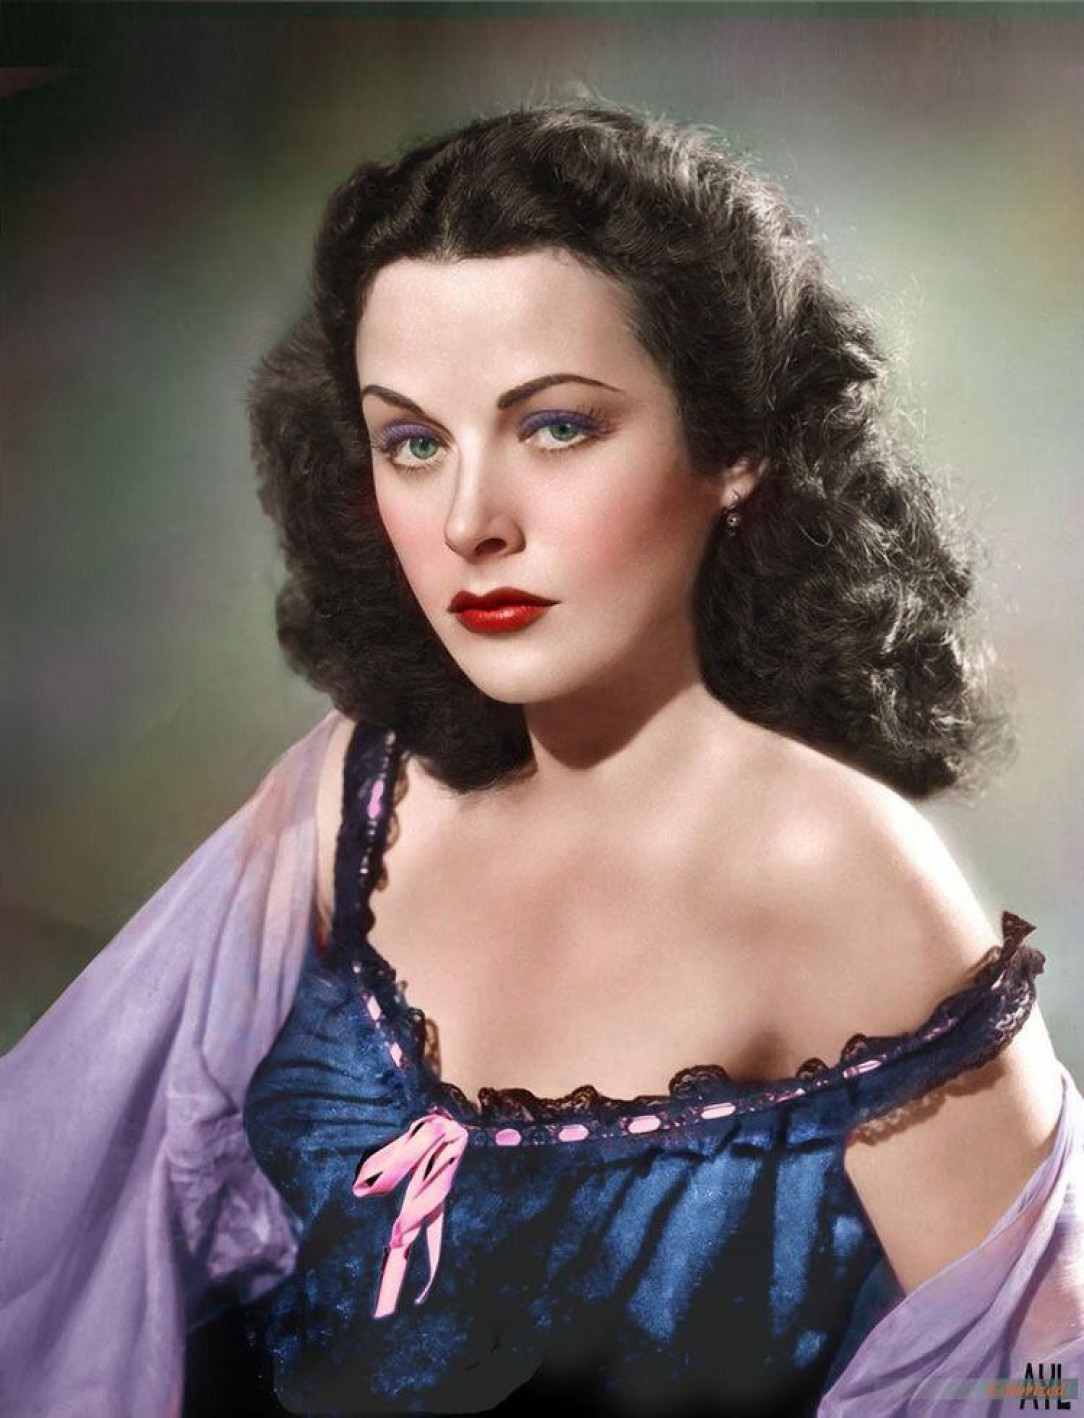 Hedy lamarr(1945) an actress and mathematician who contributed in the invention of wi-fi